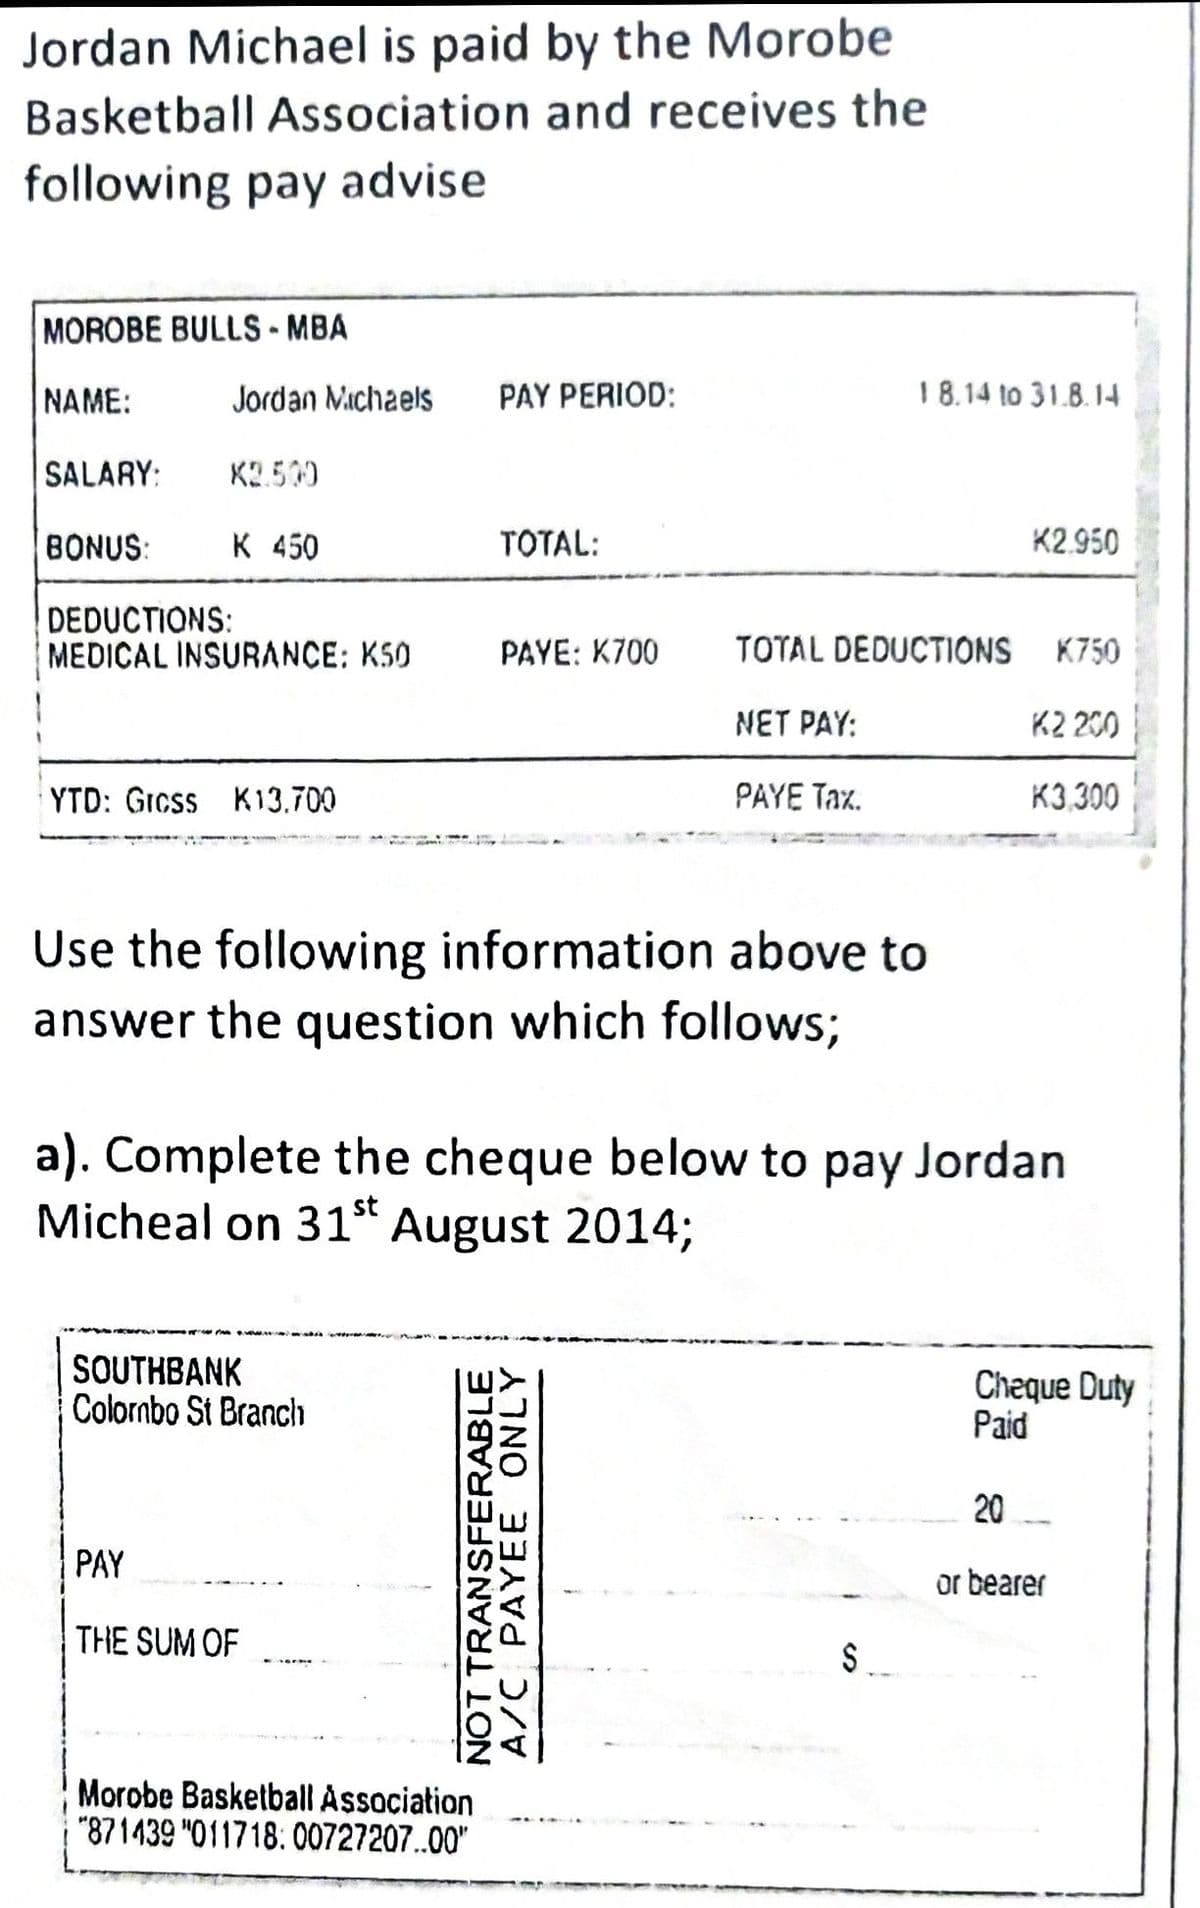 Jordan Michael is paid by the Morobe
Basketball Association and receives the
following pay advise
MOROBE BULLS-MBA
NAME:
PAY PERIOD:
SALARY: K2.500
BONUS:
K 450
TOTAL:
DEDUCTIONS:
MEDICAL INSURANCE: K50
PAYE: K700
TOTAL DEDUCTIONS
NET PAY:
YTD: Grcss K13.700
PAYE Tax.
Use the following information above to
answer the question which follows;
a). Complete the cheque below to pay Jordan
Micheal on 31st August 2014;
SOUTHBANK
Colombo St Branch
Cheque Duty
Paid
20
PAY
or bearer
THE SUM OF
Morobe Basketball Association
"871439 "011718:00727207..00"
Jordan Michaels
NOT TRANSFERABLE
A/C PAYEE ONLY
S
18.14 to 31.8.14
K2.950
K750
K2 200
K3.300